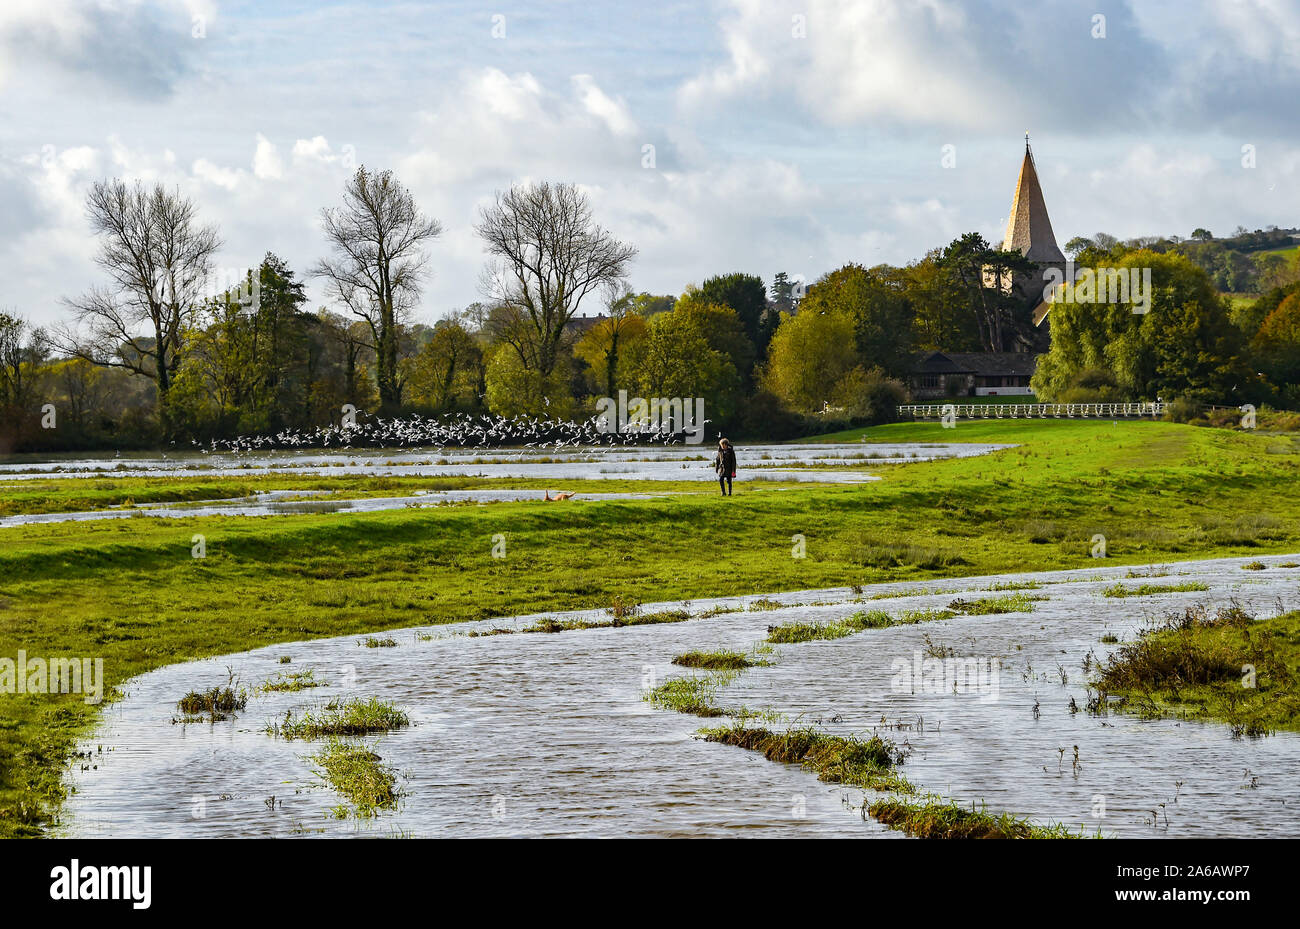 Alfriston Sussex, UK. 25th Oct, 2019. A dog walker passes by flooding along the River Cuckmere near Alfriston in East Sussex after weeks of heavy rain which has been above the average for the time of year. Yellow weather warnings have been issued for parts of the country where more heavy rain and flooding is forecast over the next 24 hours . The flooding along Cuckmere Haven has been worse in the last few years since the Environment Agency decided to stop maintaining defences. Credit: Simon Dack/Alamy Live News Stock Photo